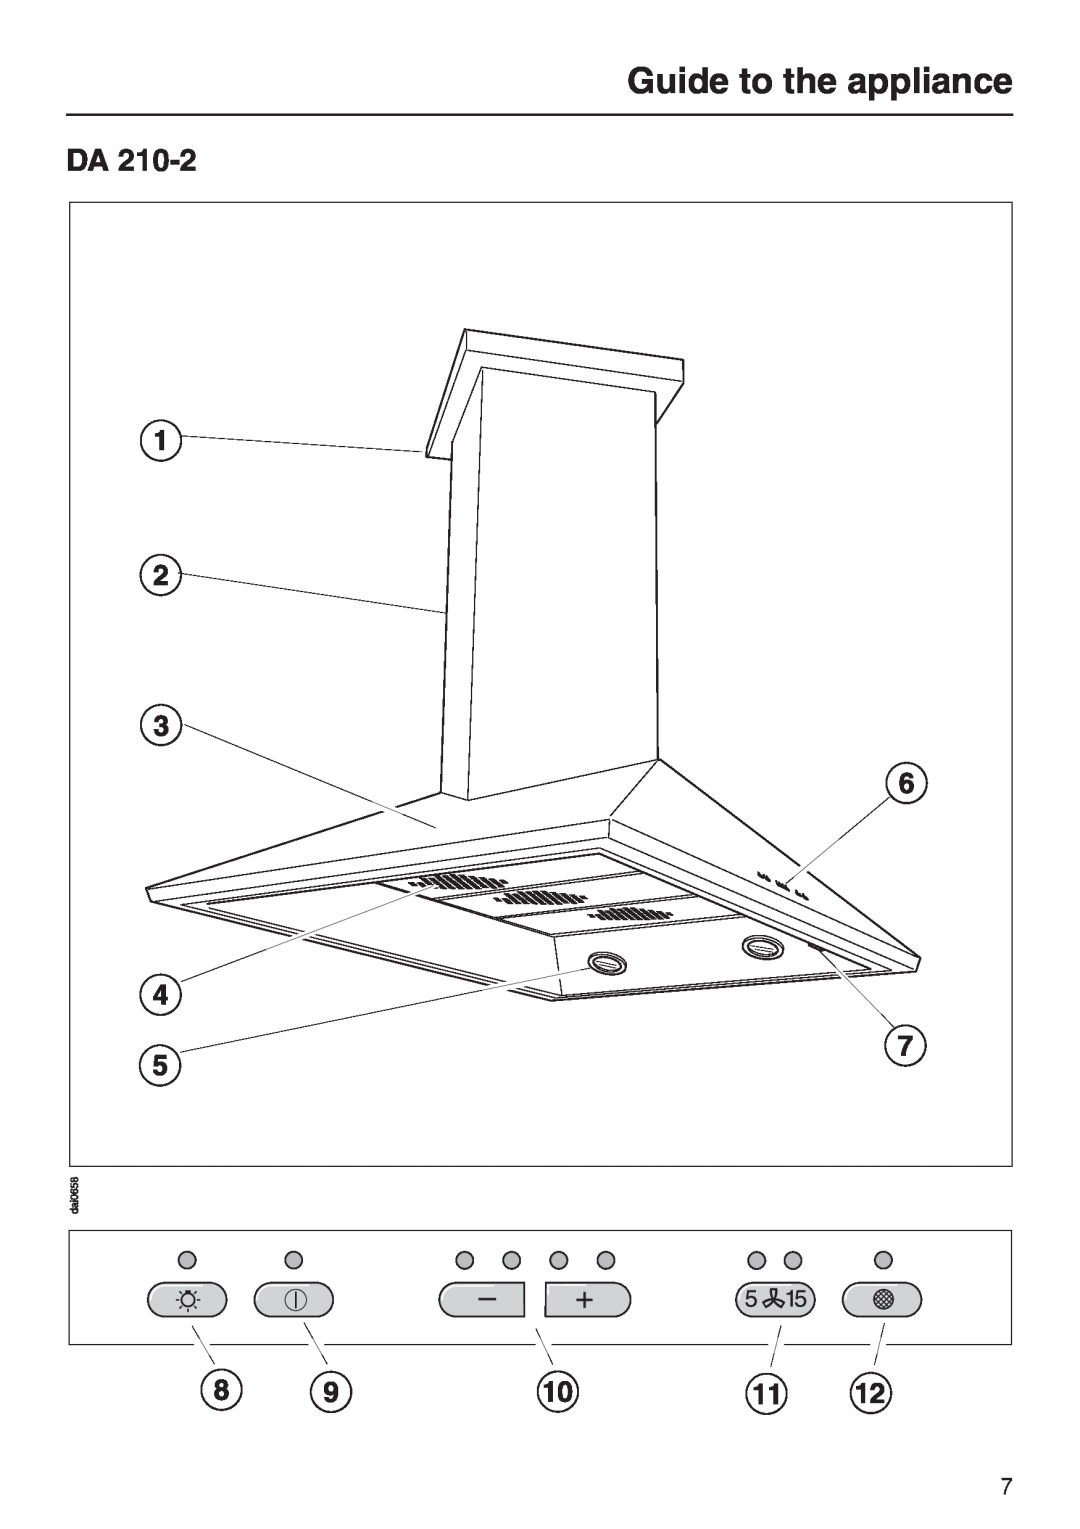 Miele DA210-3 installation instructions Guide to the appliance 